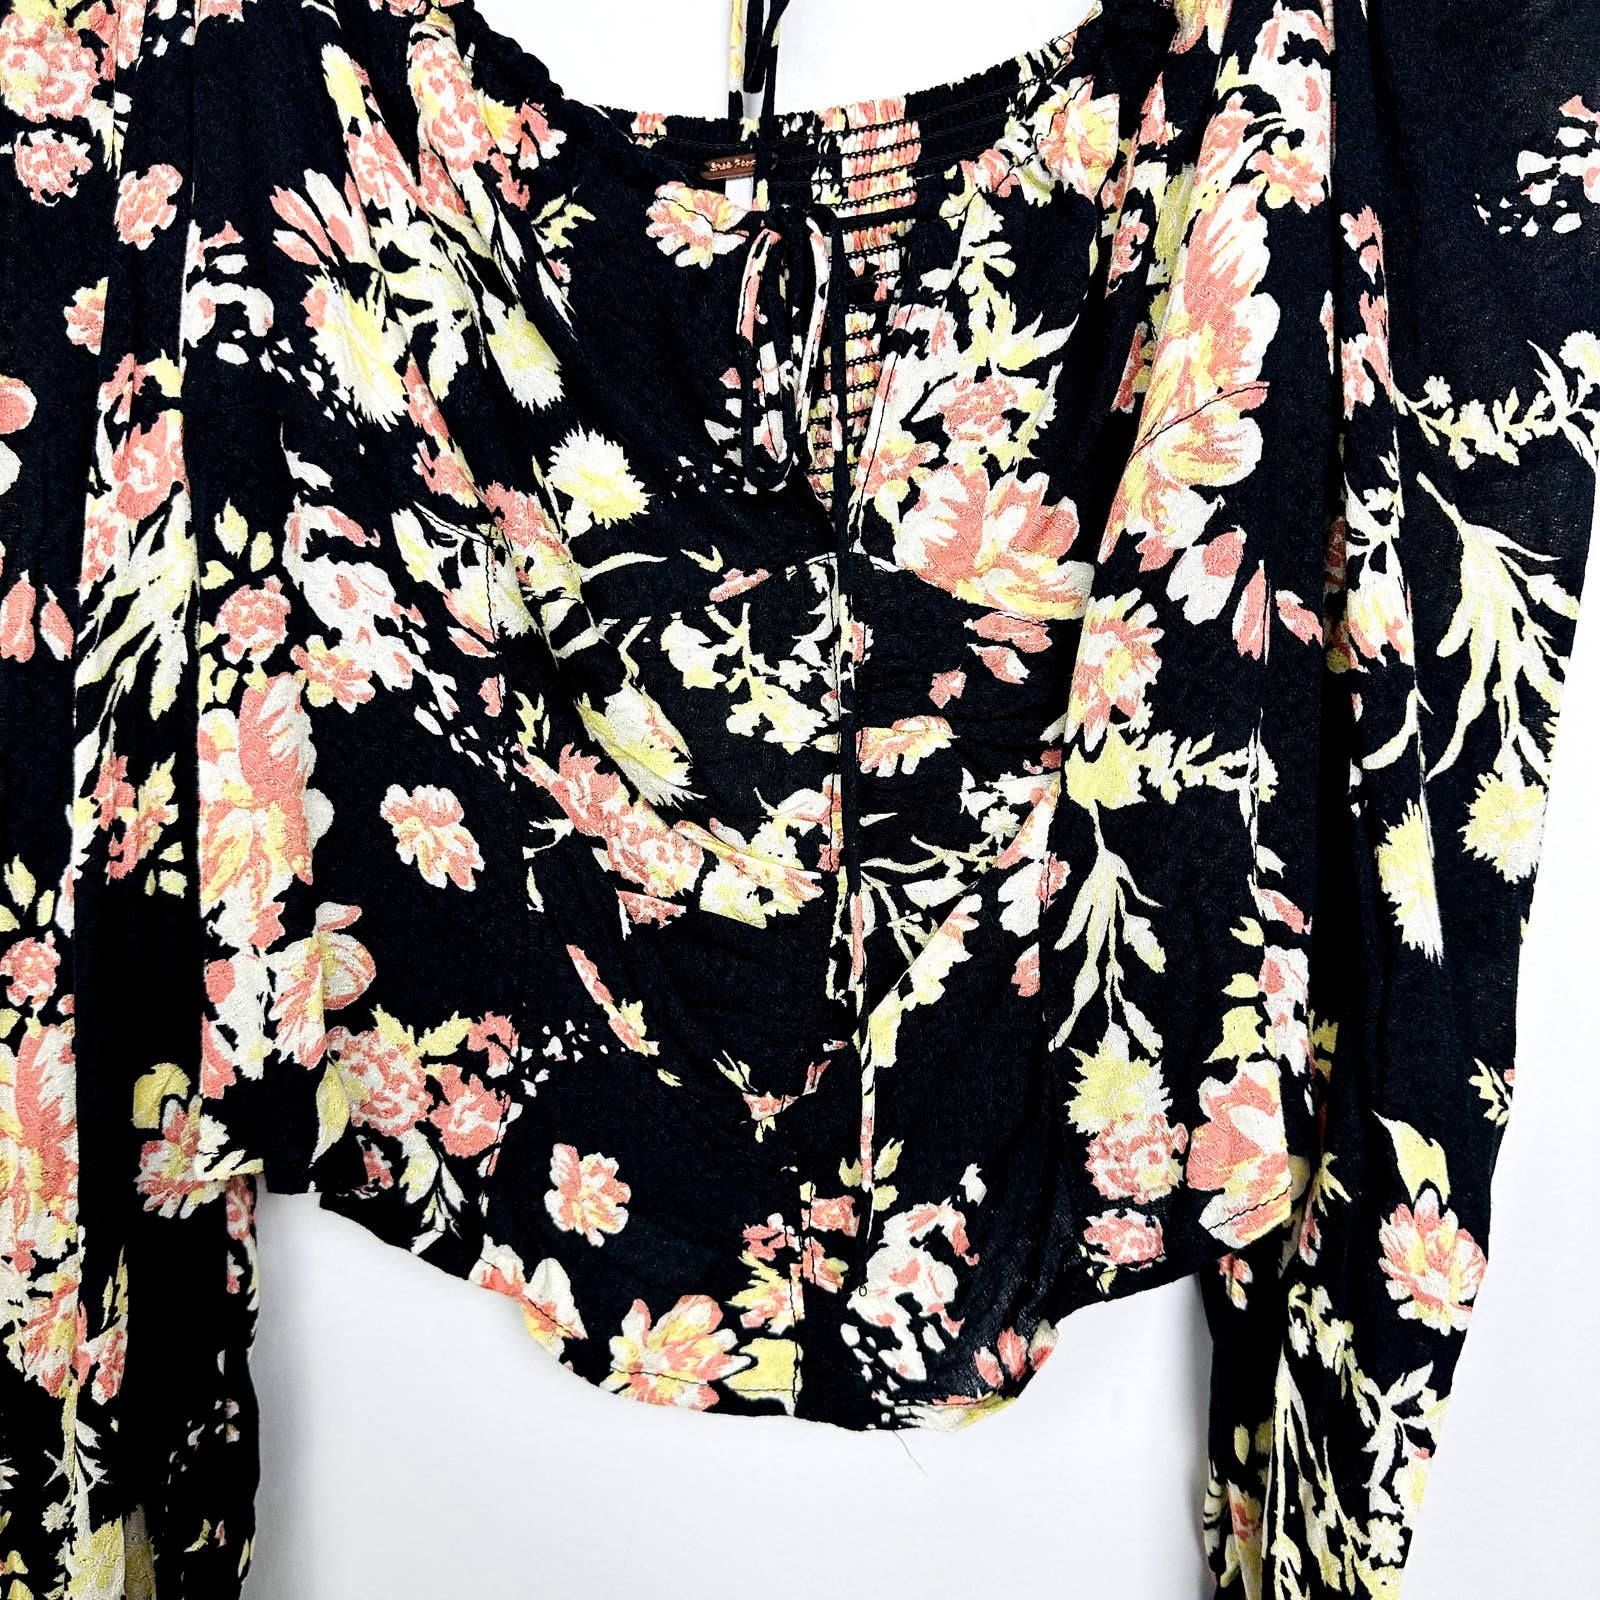 Free People NWT Hilary Floral Print Puff Sleeves Cropped Top Black Combo Medium